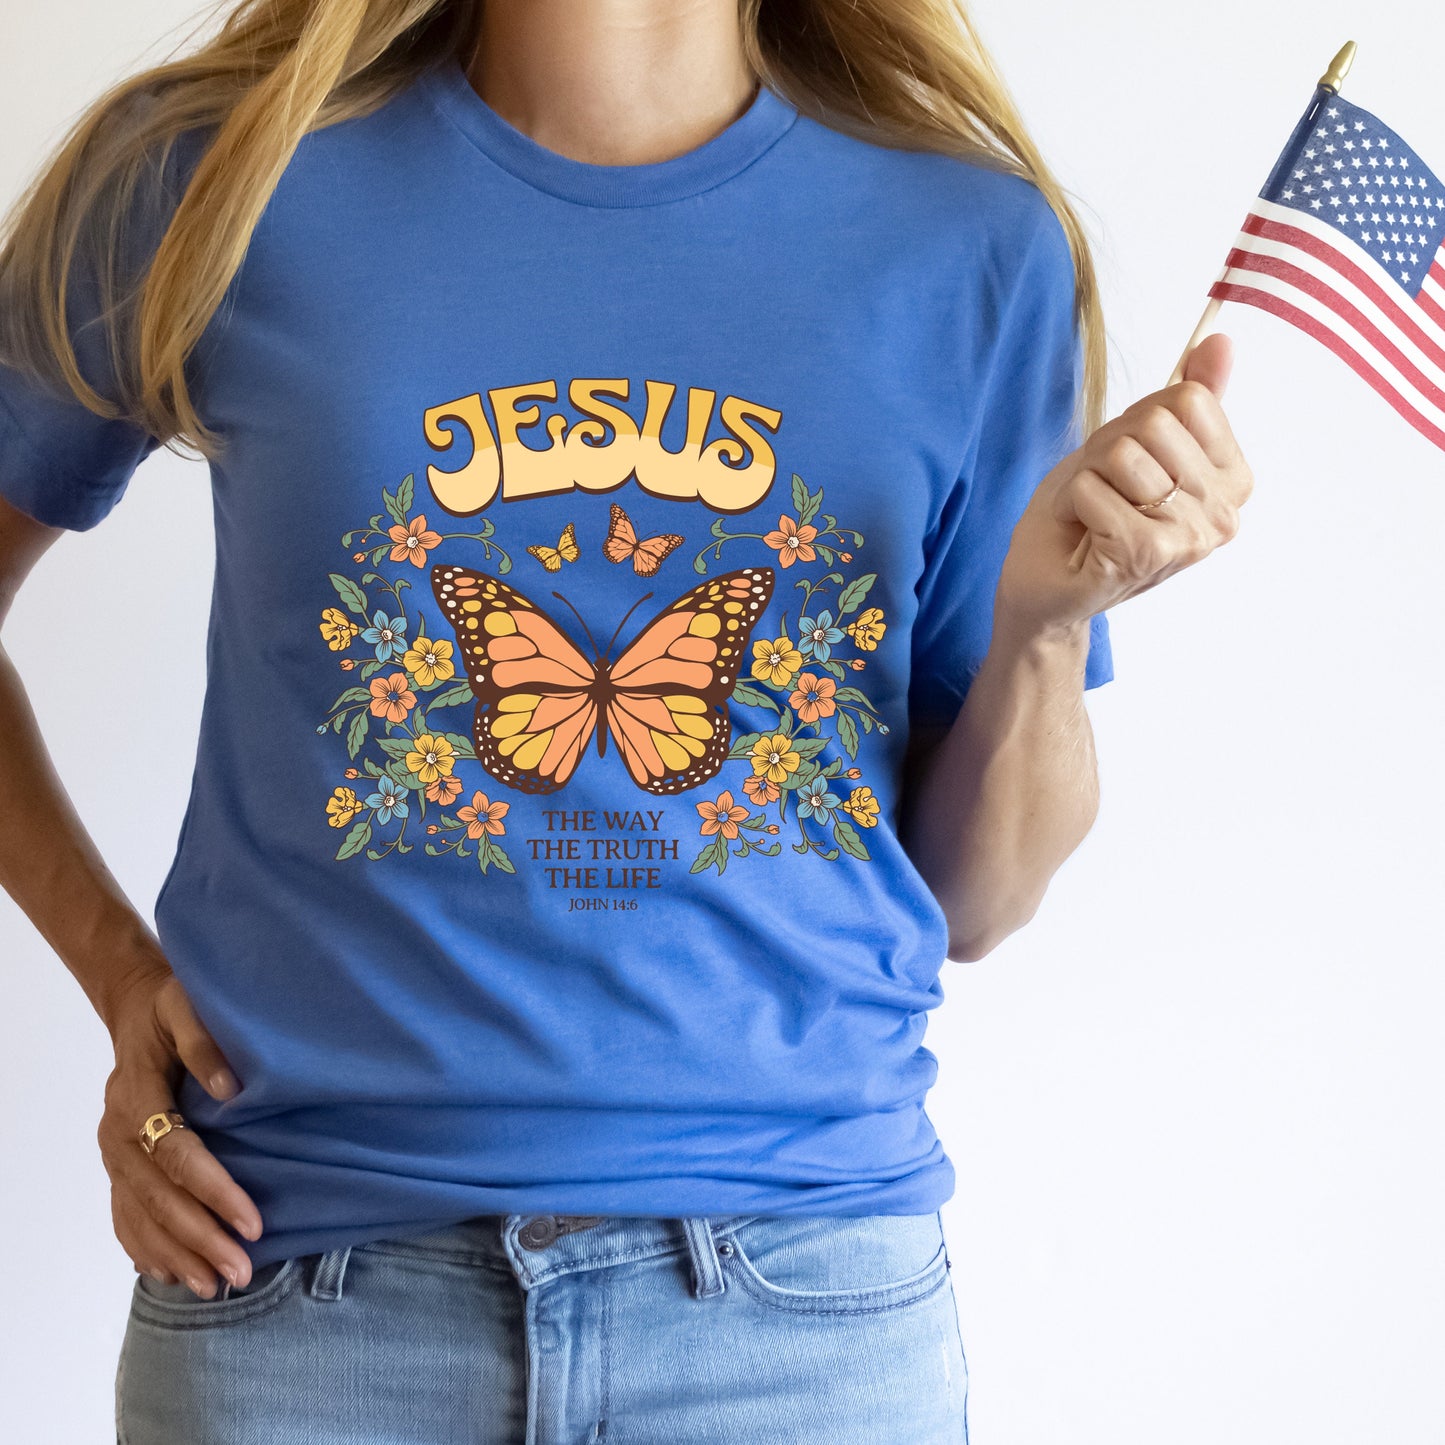 Boho Christian Shirts Christian TShirts Bible Verse Shirt Trendy Christians T Shirts Jesus Apparel Jesus is the way the truth and the life